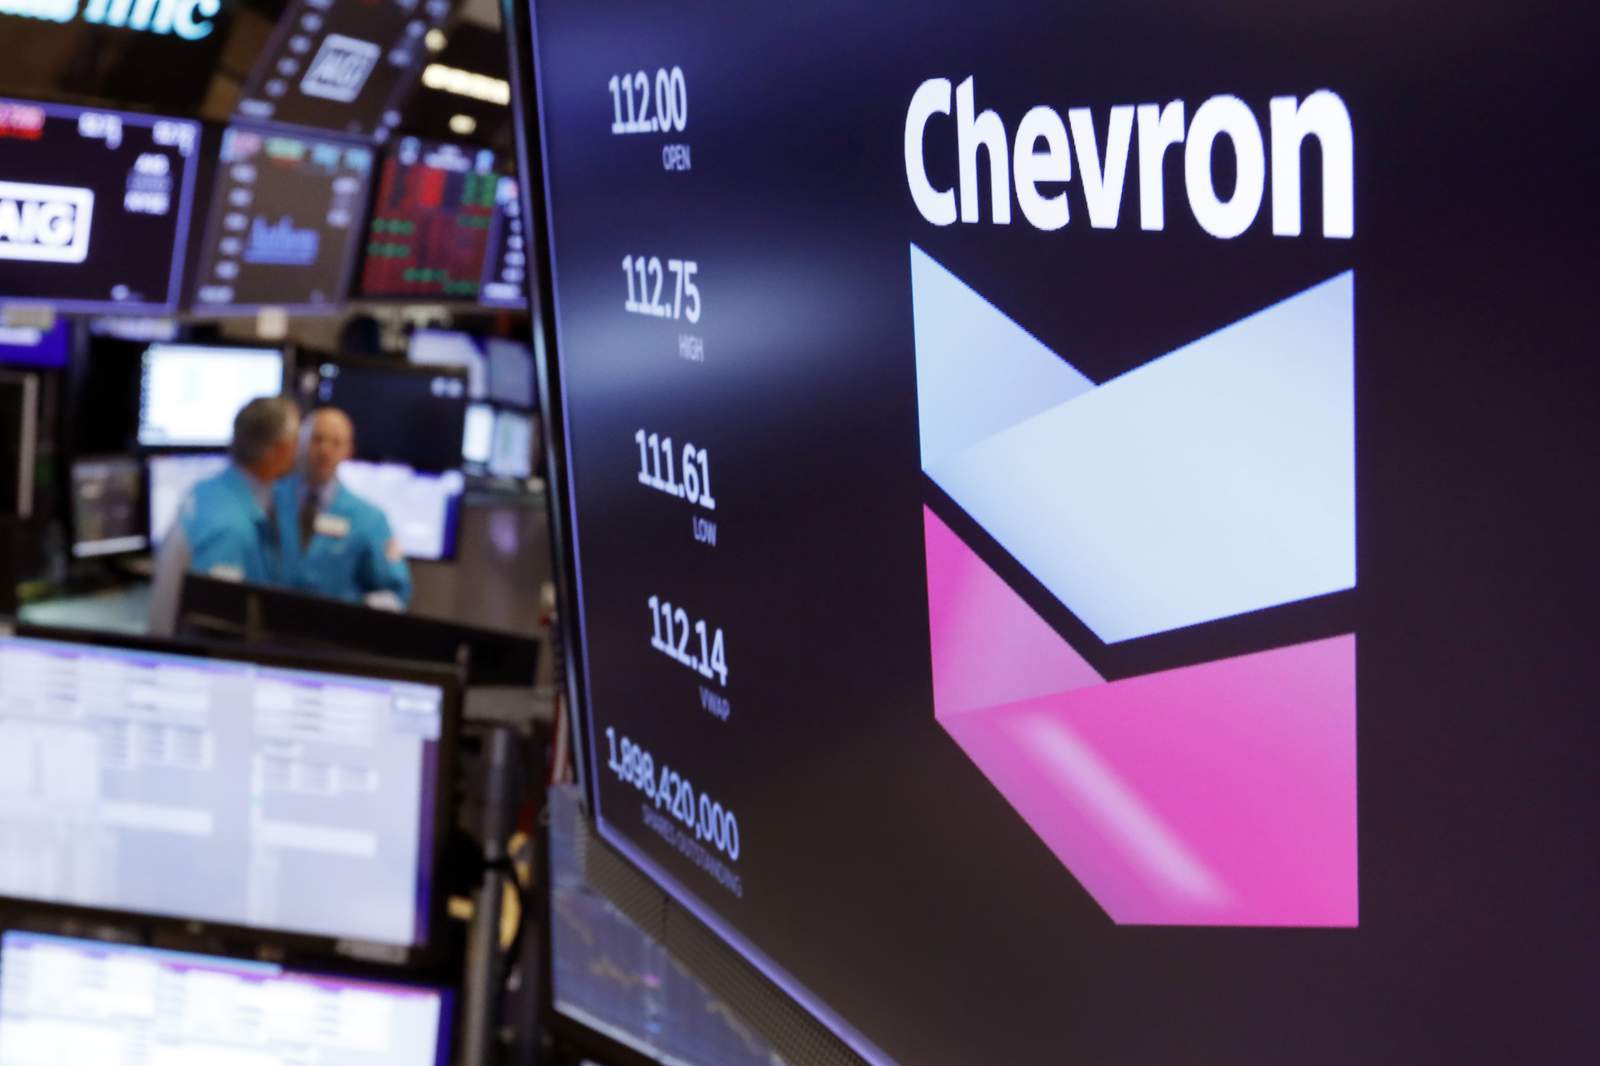 Chevron acquires Noble Energy for $5 billion, biggest purchase since beginning of pandemic